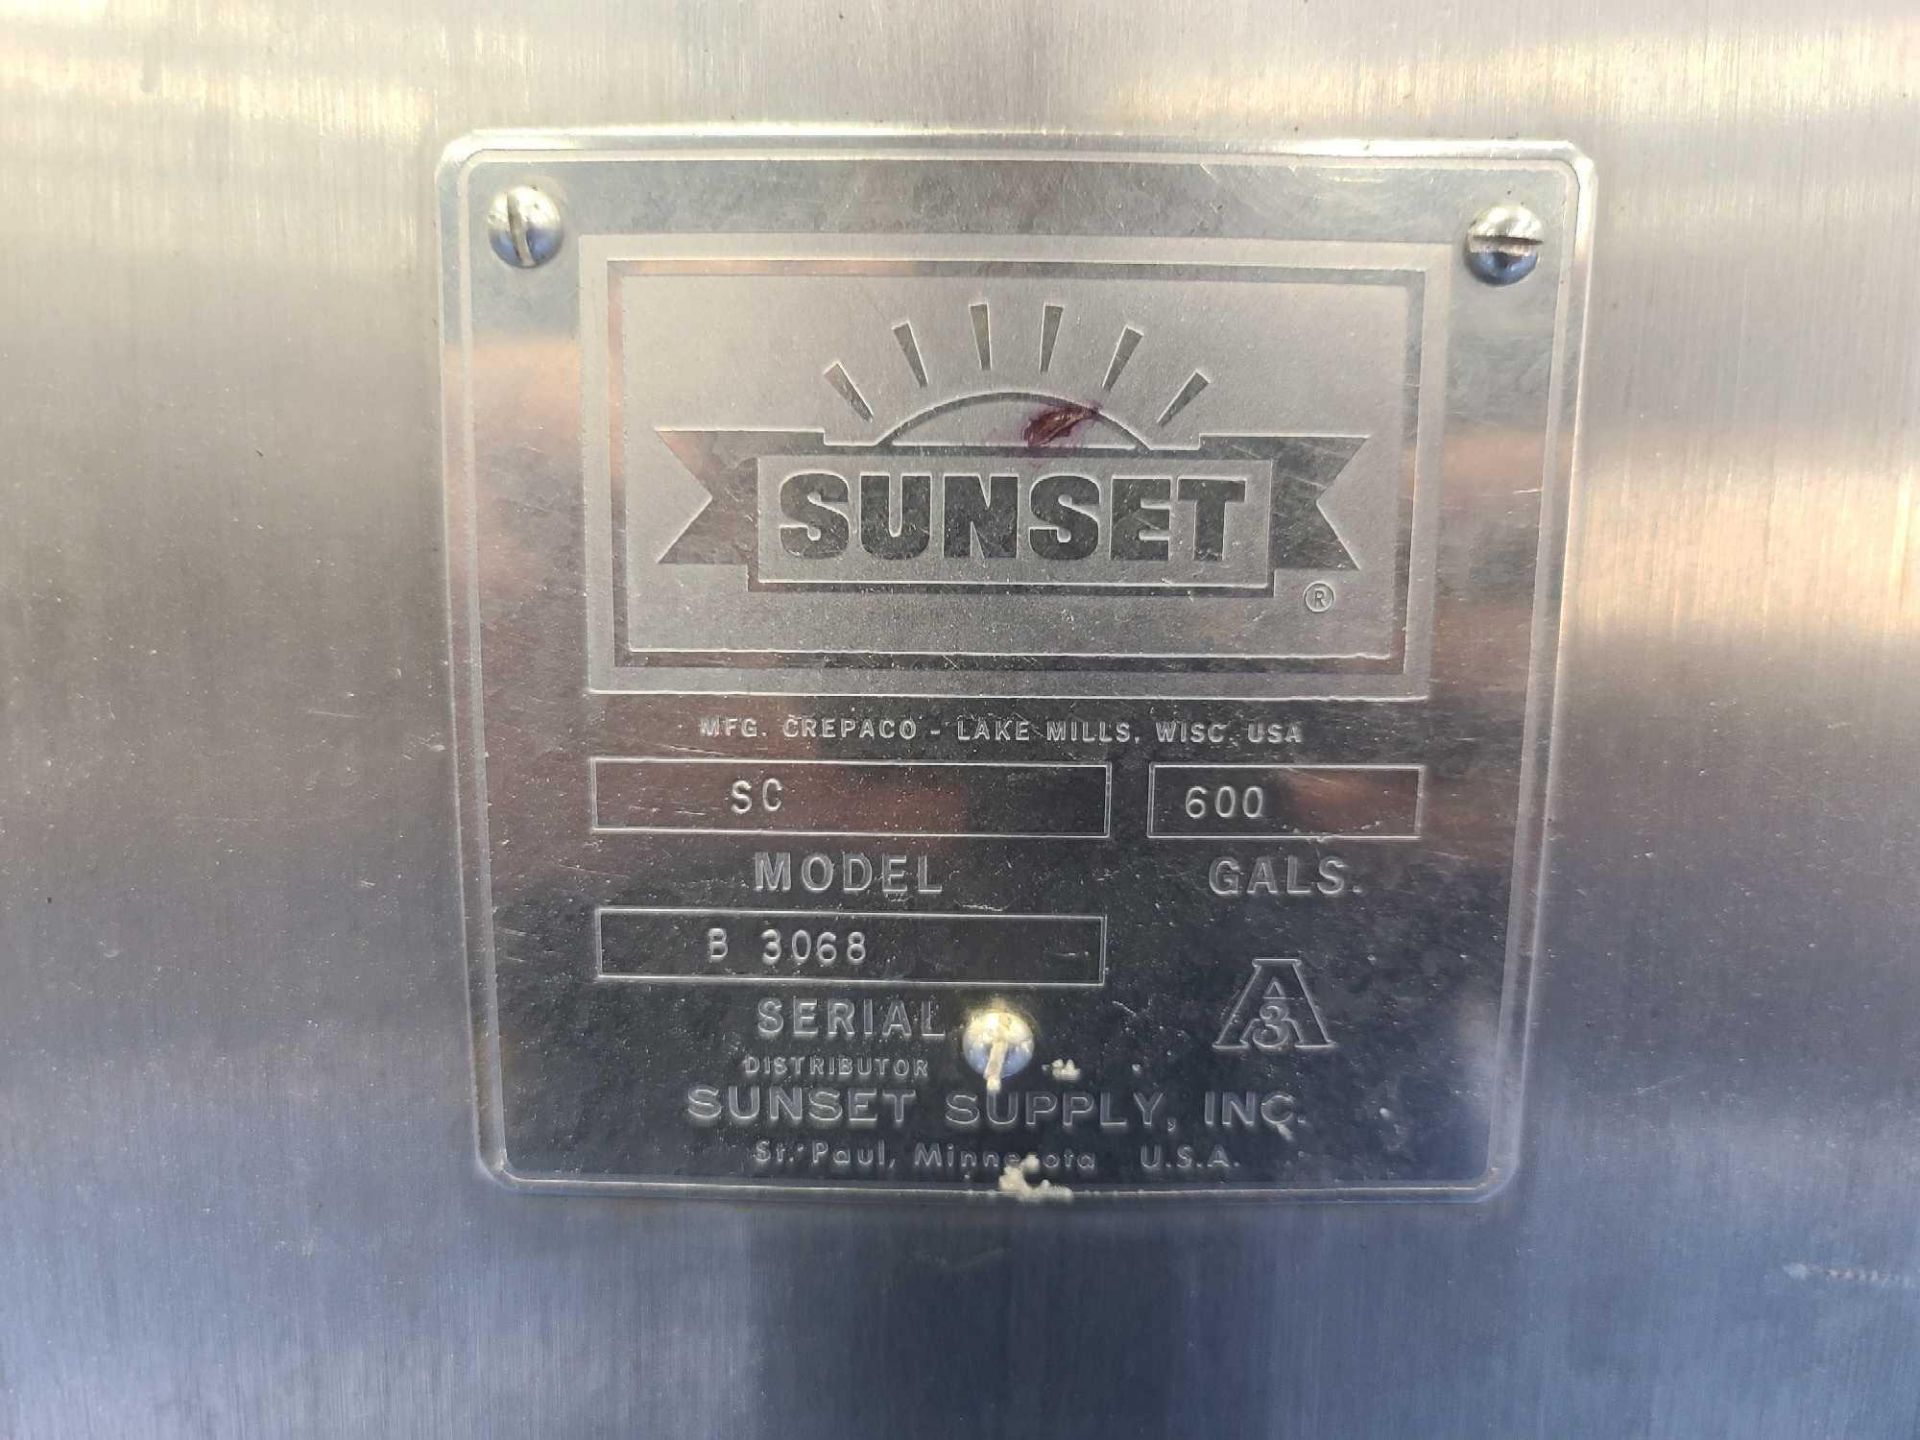 Sunset SC 600 Gallon Stainless Steel Insulated Horizontal Tank - Image 6 of 8